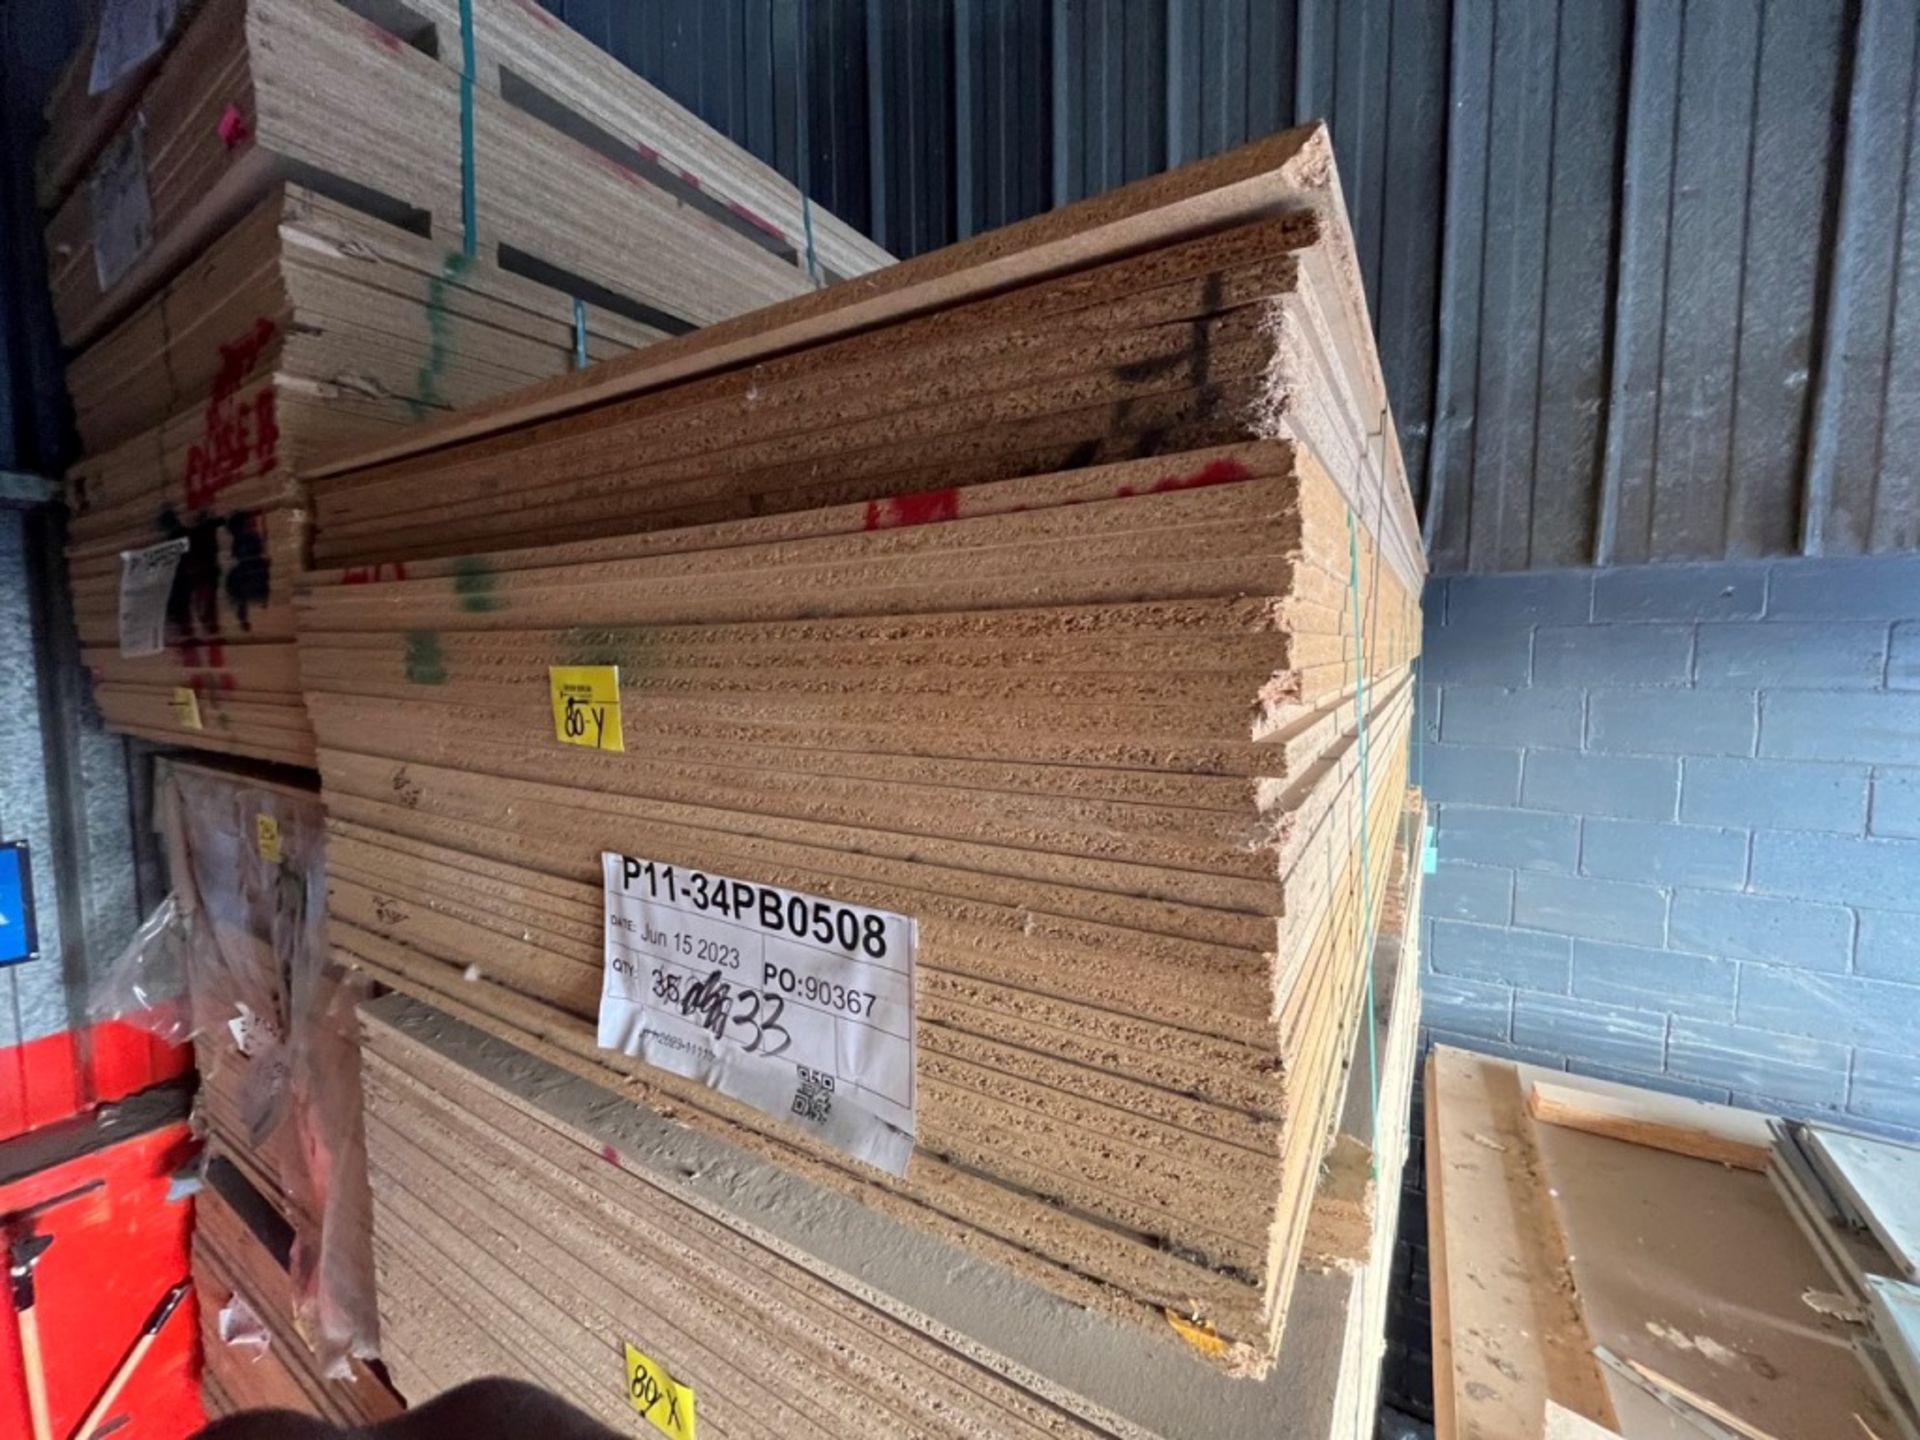 Lot of 53 pieces of compressed wood contains: 33 pieces in 3/4 PB0508 material measuring 4 x 8 ft; - Image 2 of 10